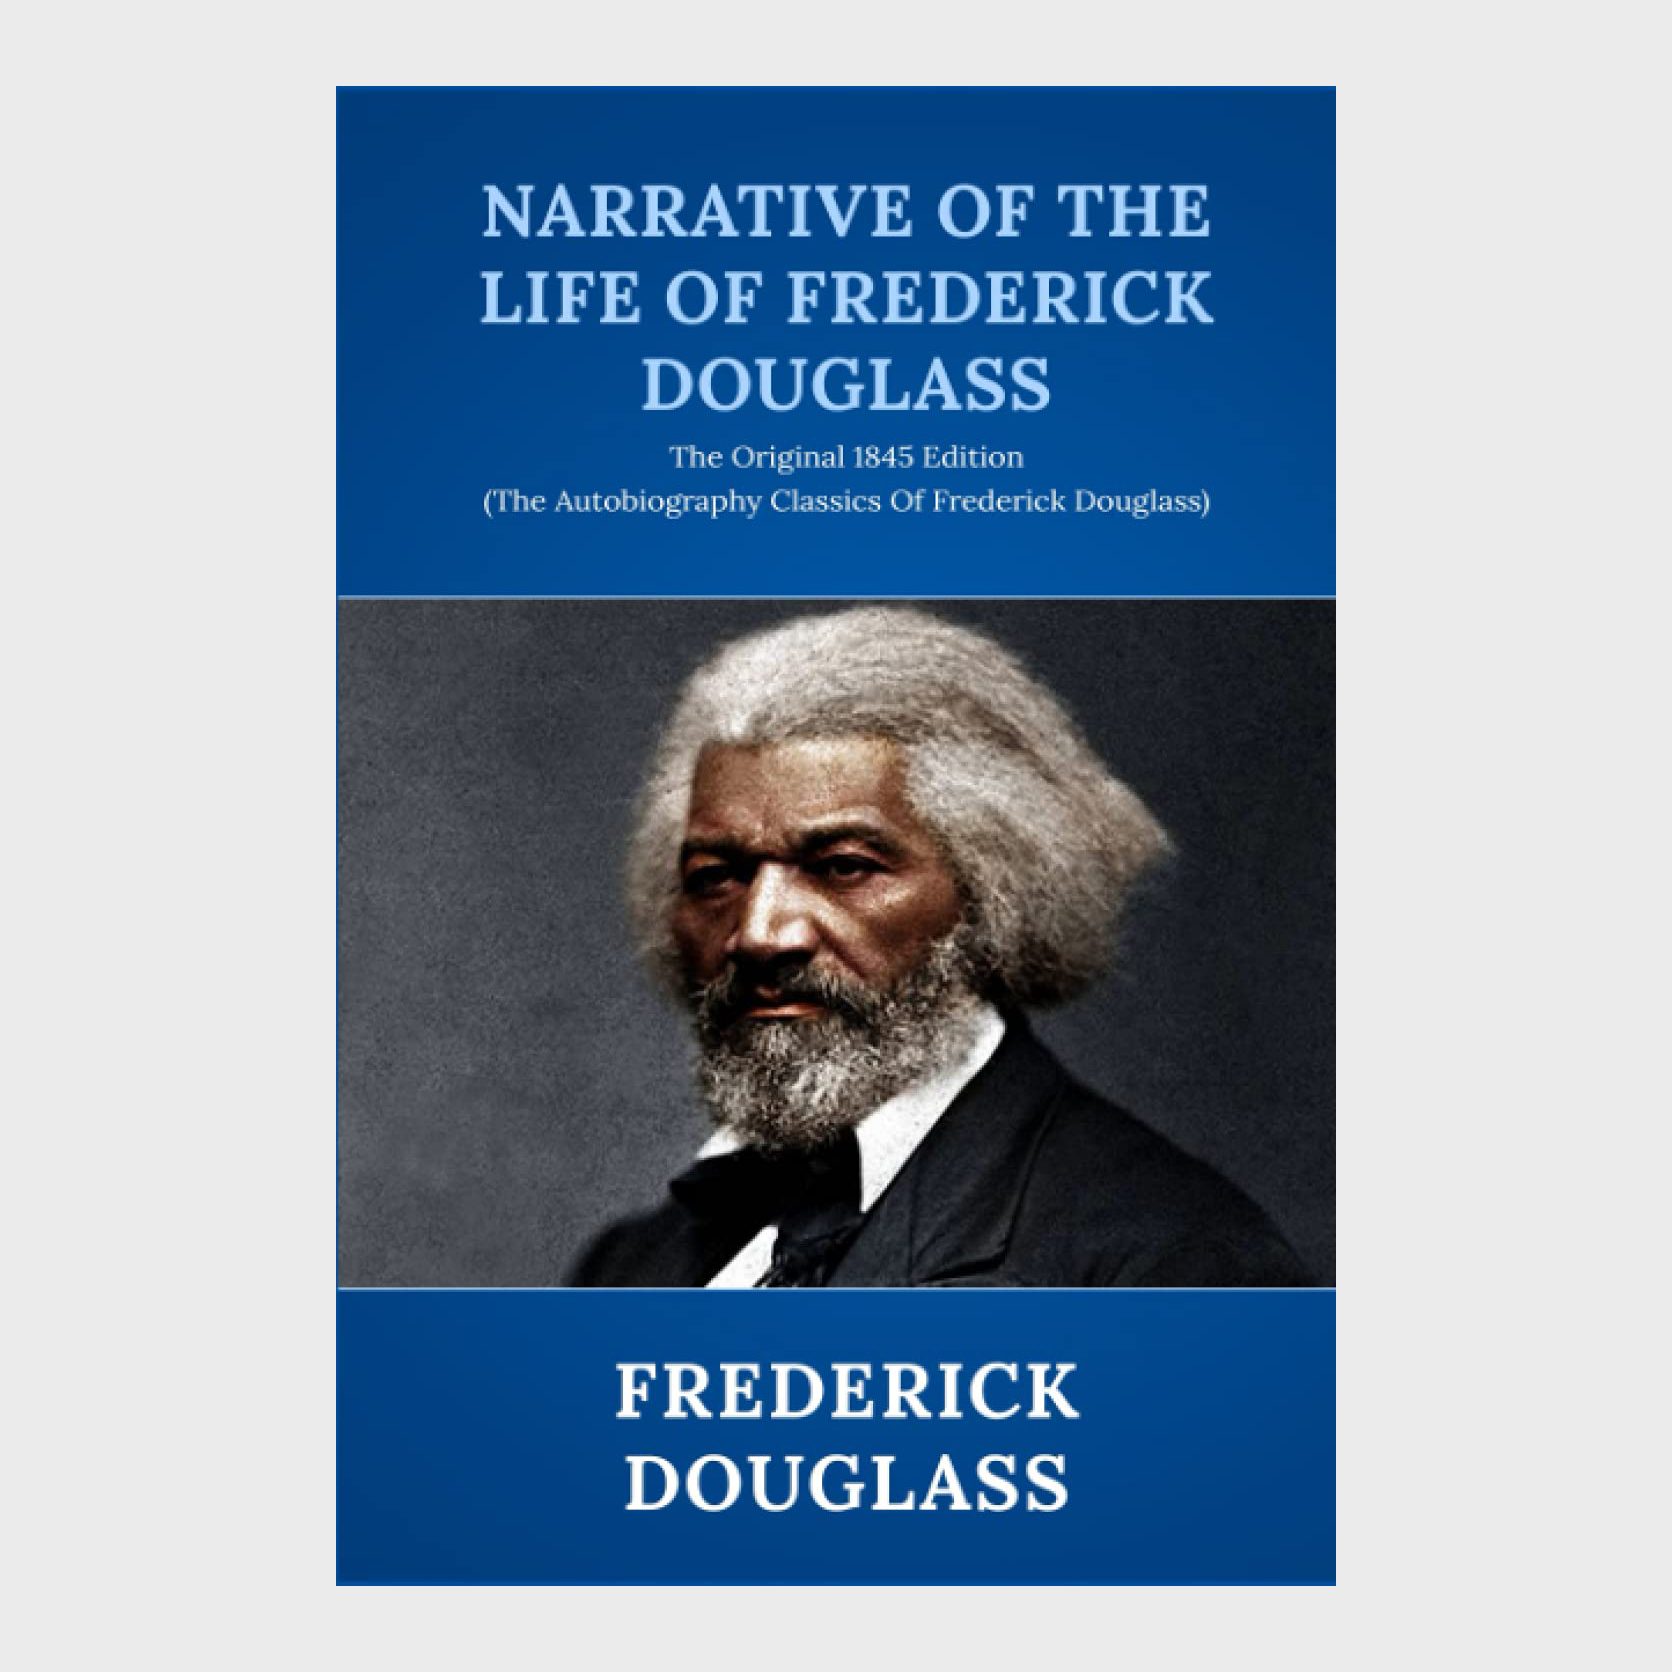 Narrative of the Life of Frederick Douglass, an American Slave by Frederick Douglass